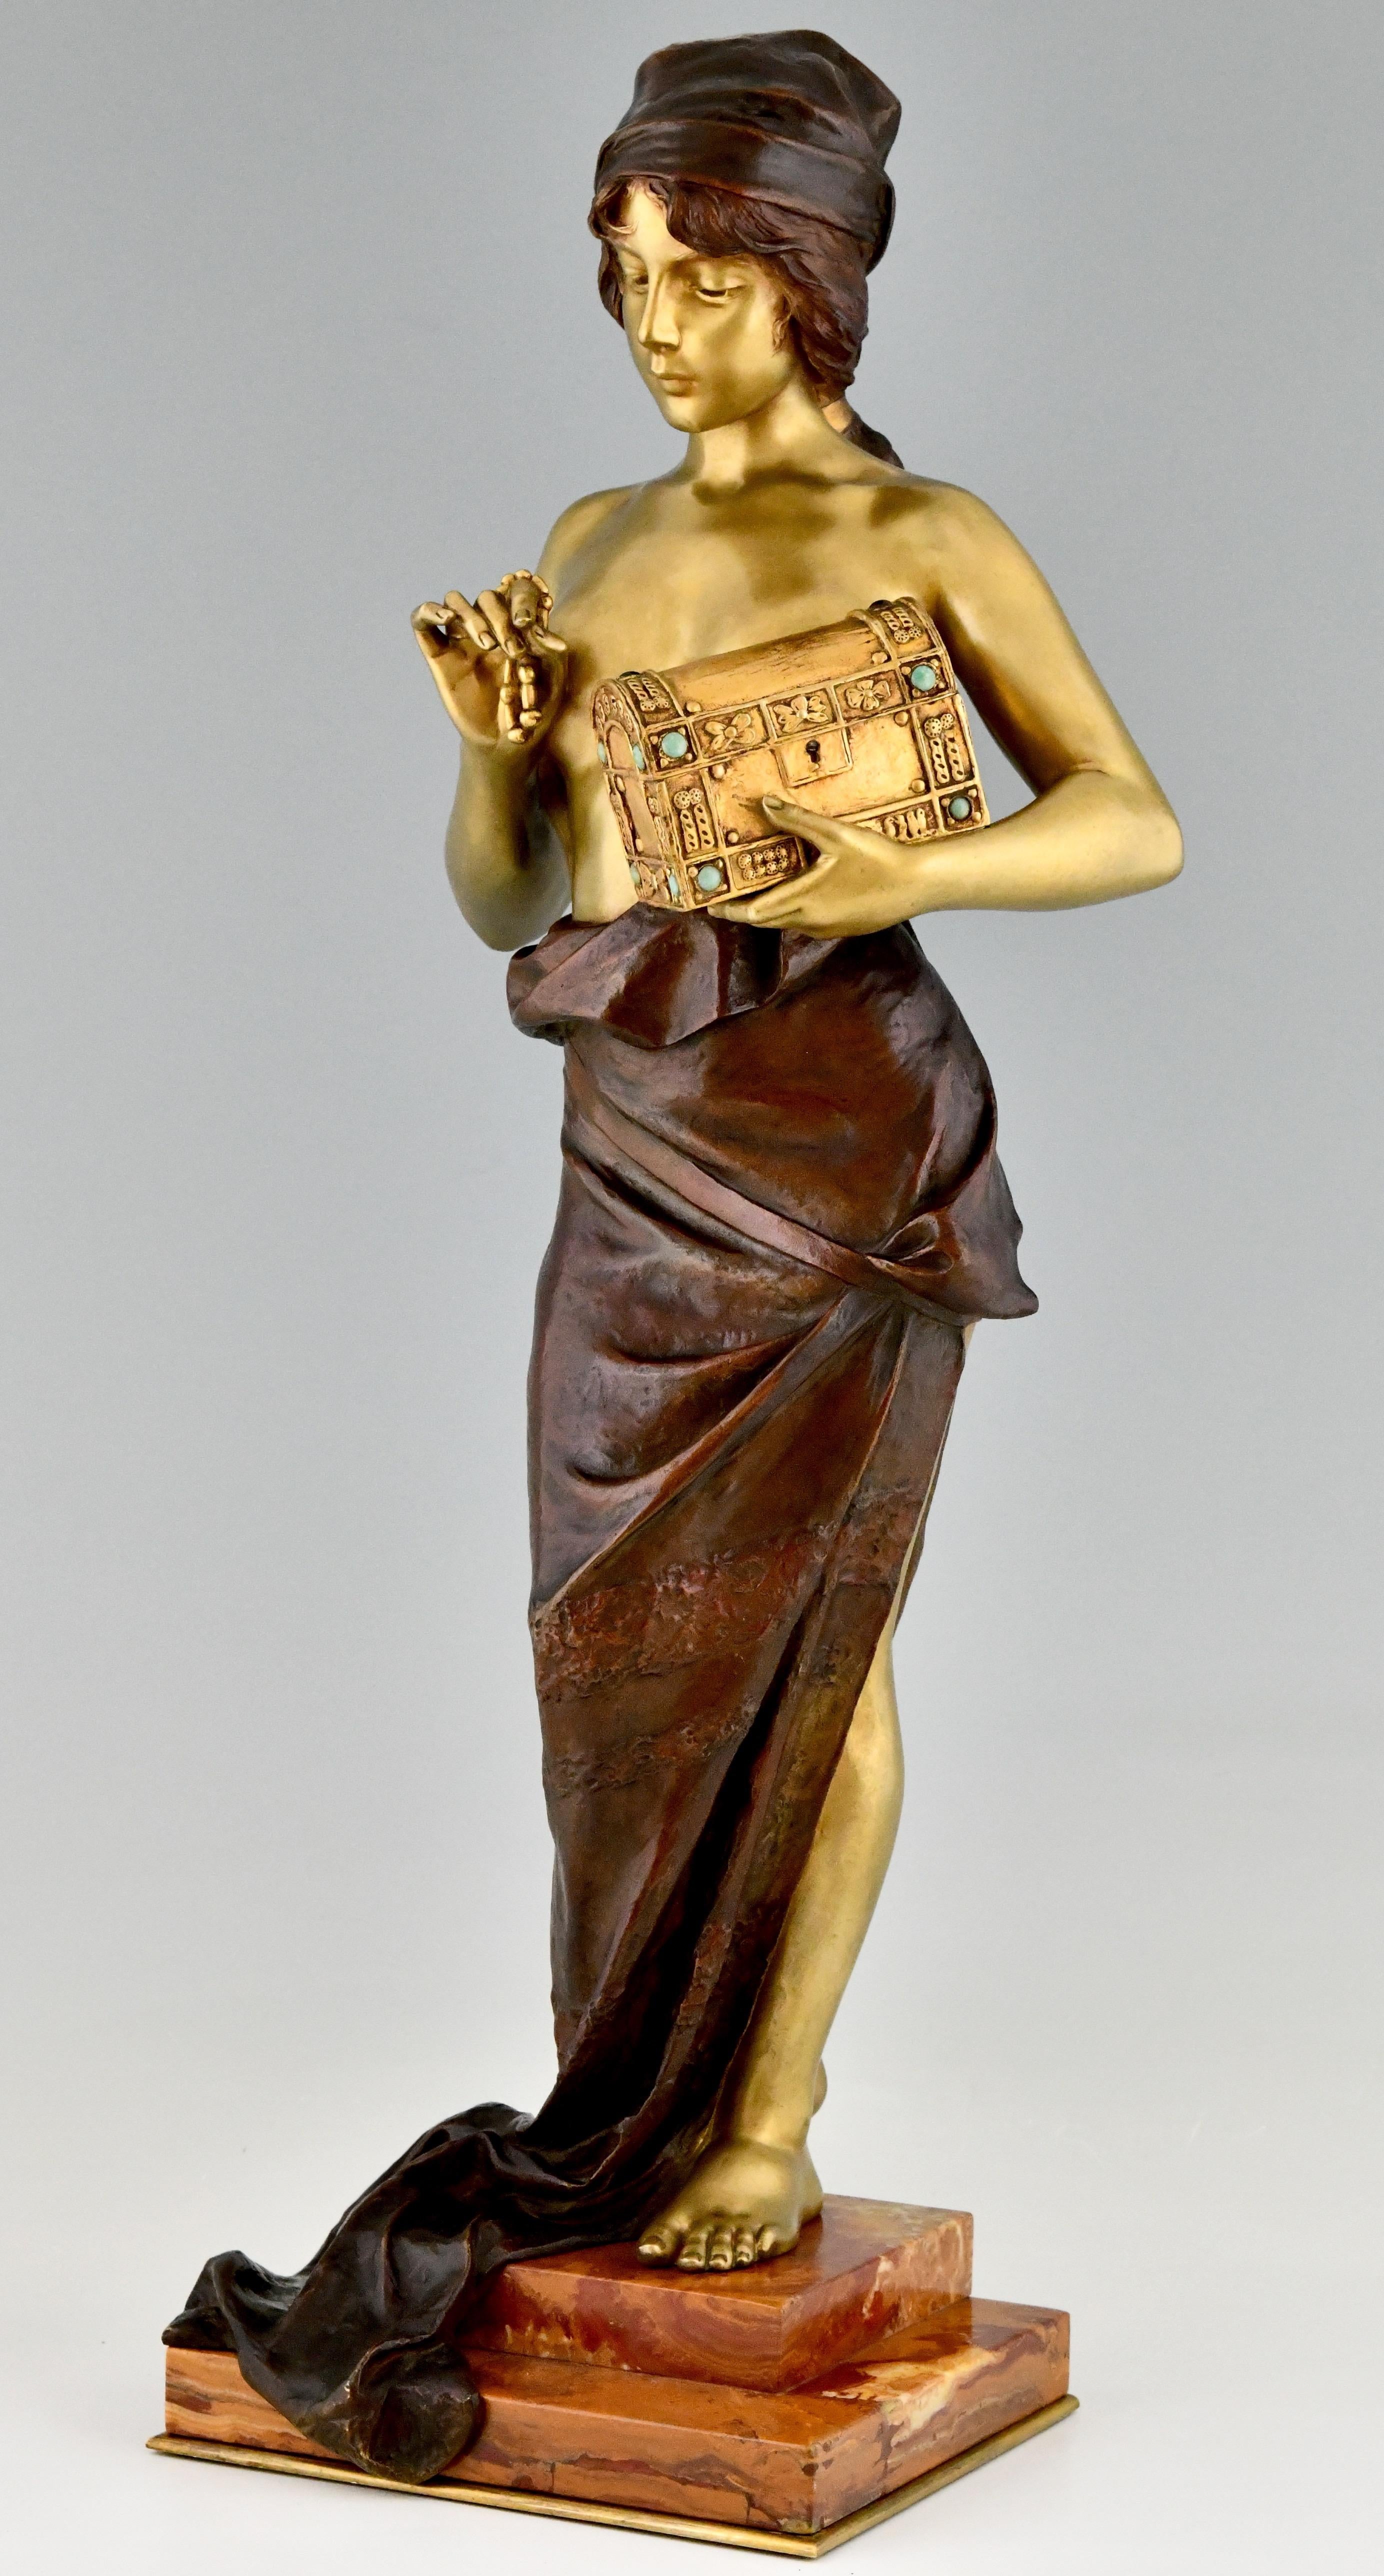 Art Nouveau bronze sculpture of a semi nude lady holding a jewelry casket by Emmanuel Villanis. impressive size. This model is ver hard to find. The bronze statue has a beautiful patina and stands on a fine marble base. France ca. 1900.